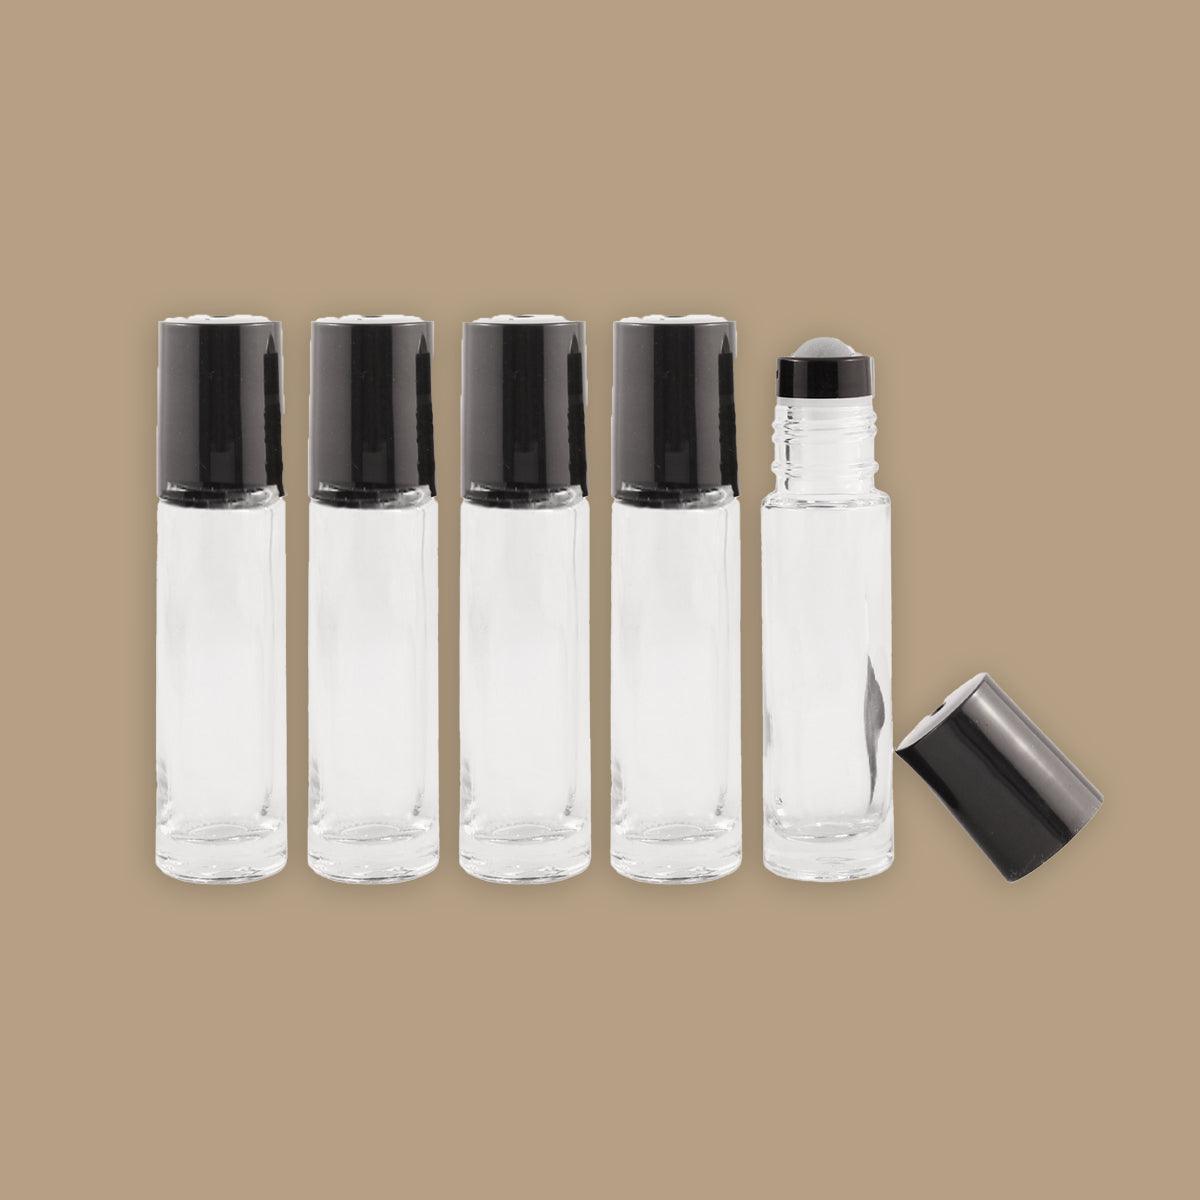 10ml glass roller bottle - clear - stainless steel roller balls - 5 pack - local - letsbelocal.ca